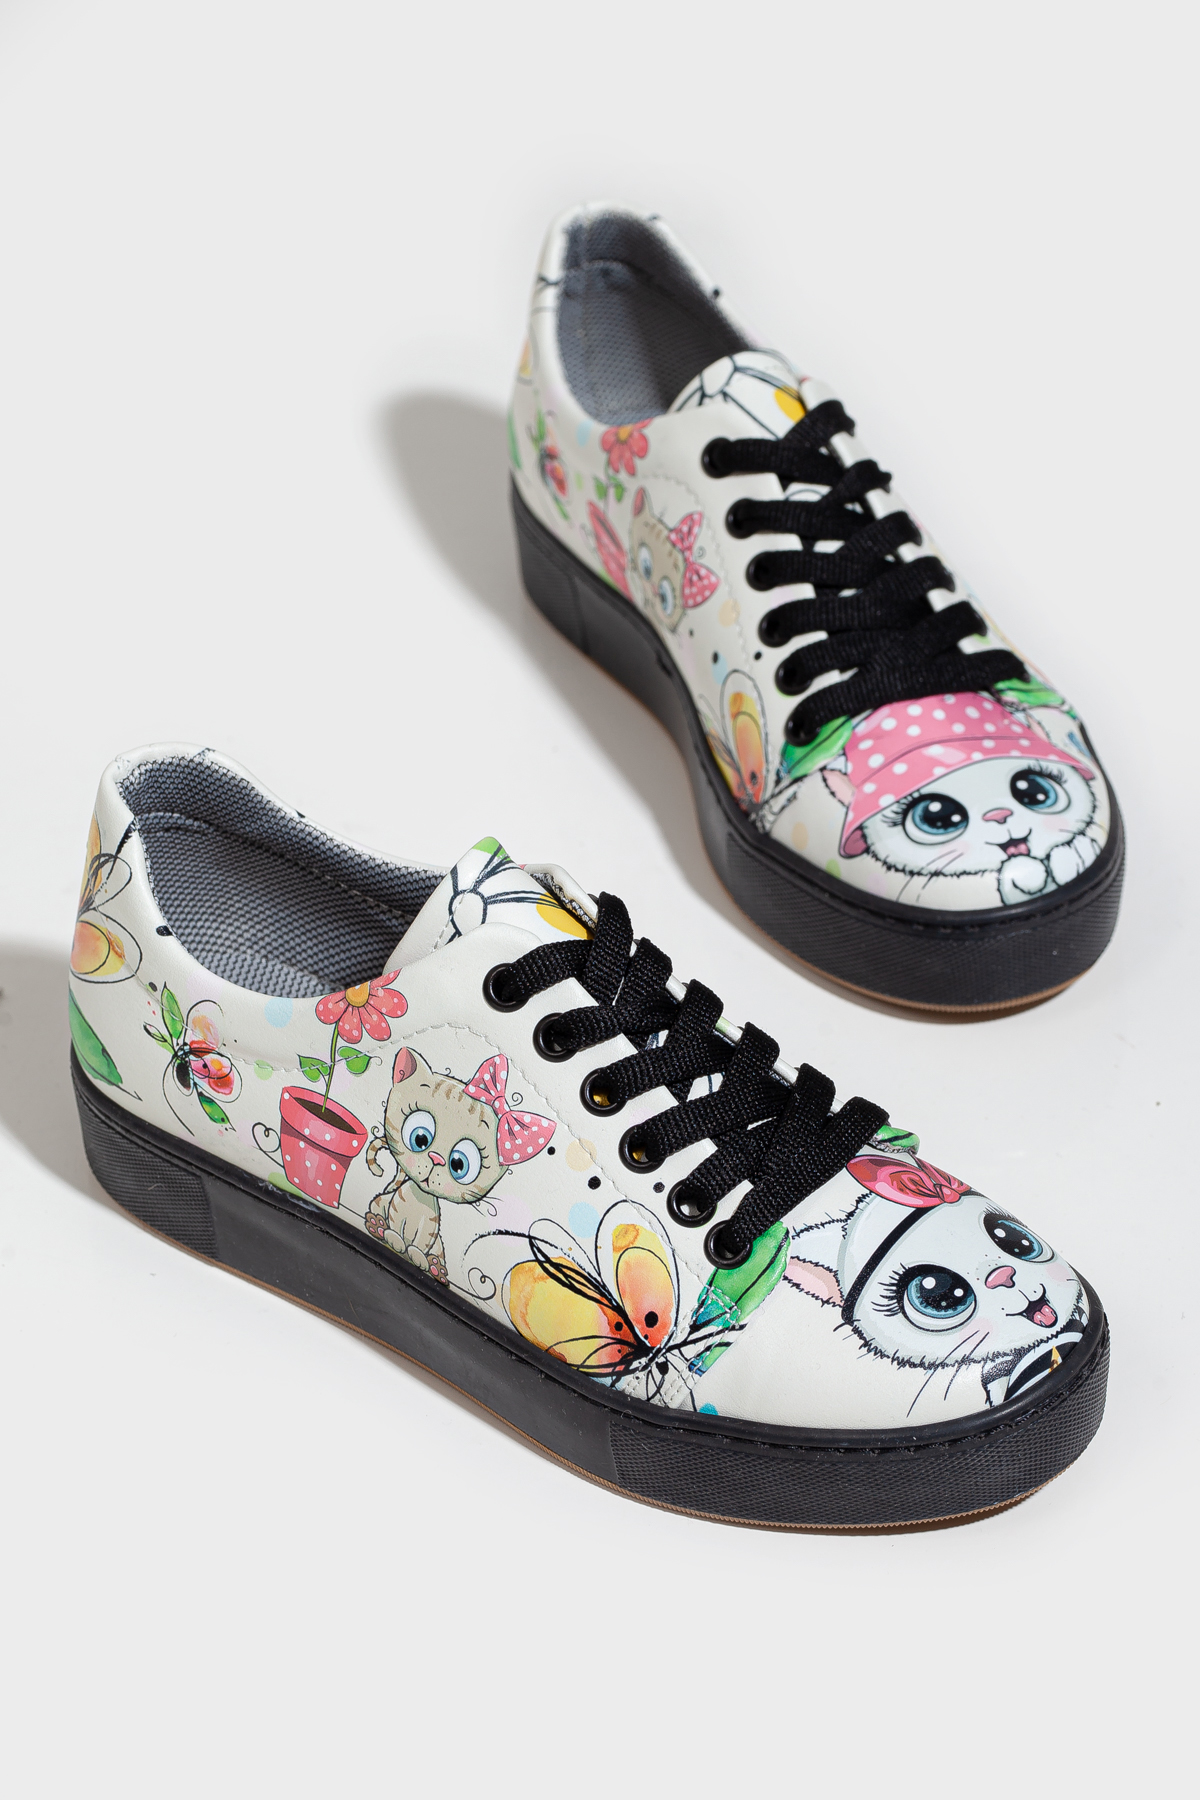 CAT DESIGN SNEAKERS WITH PINK HAT